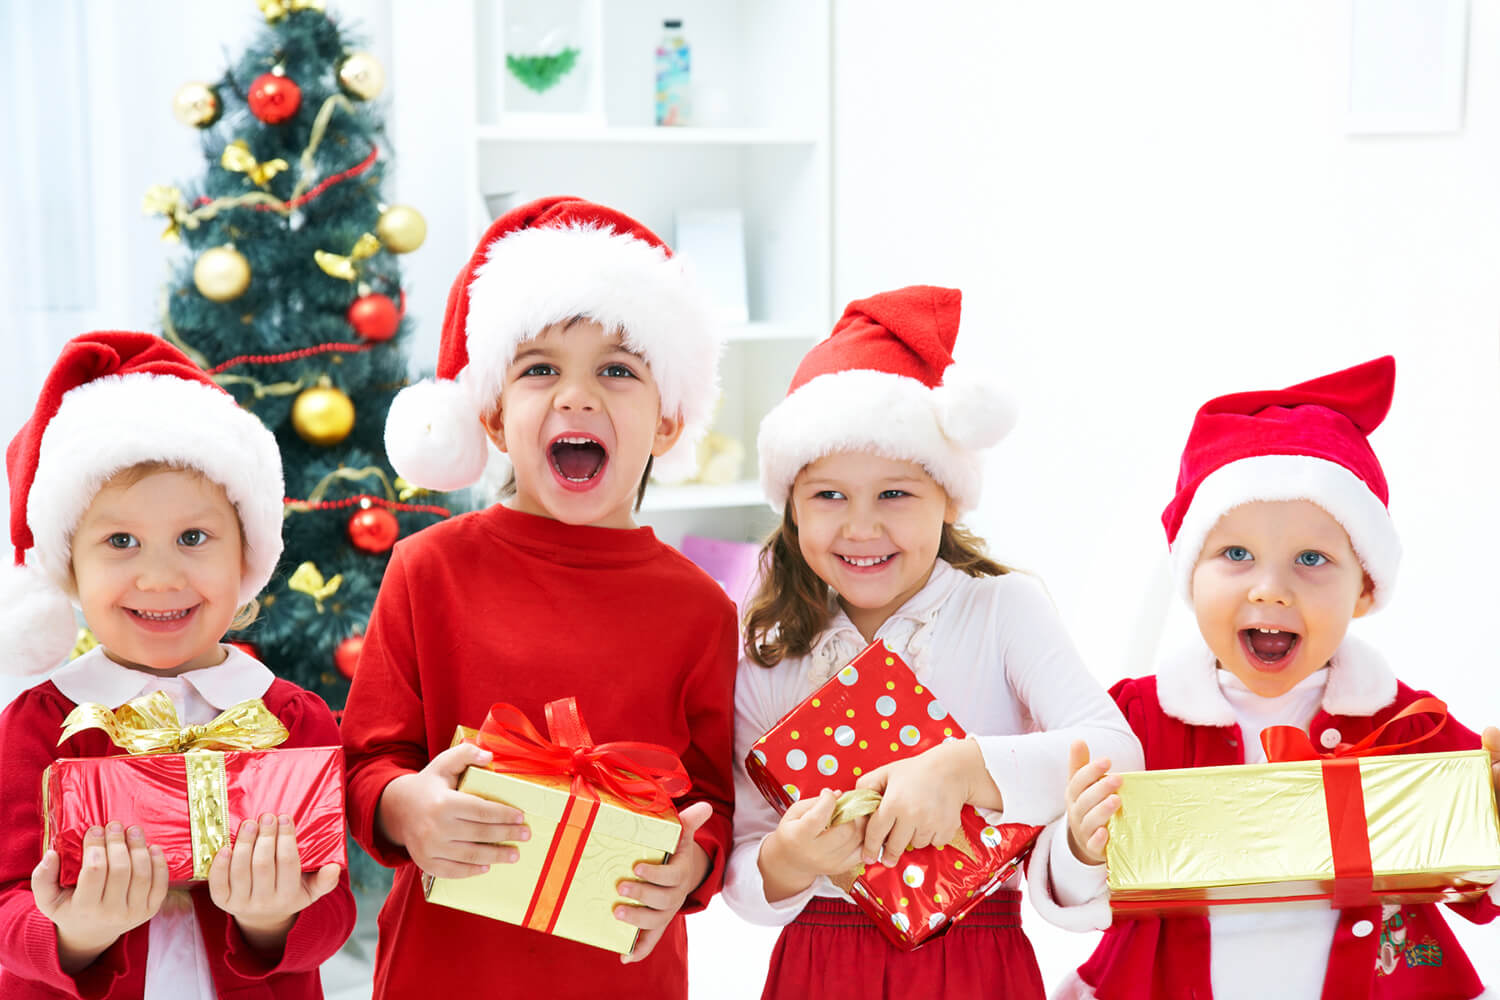 An image of children holding gifts